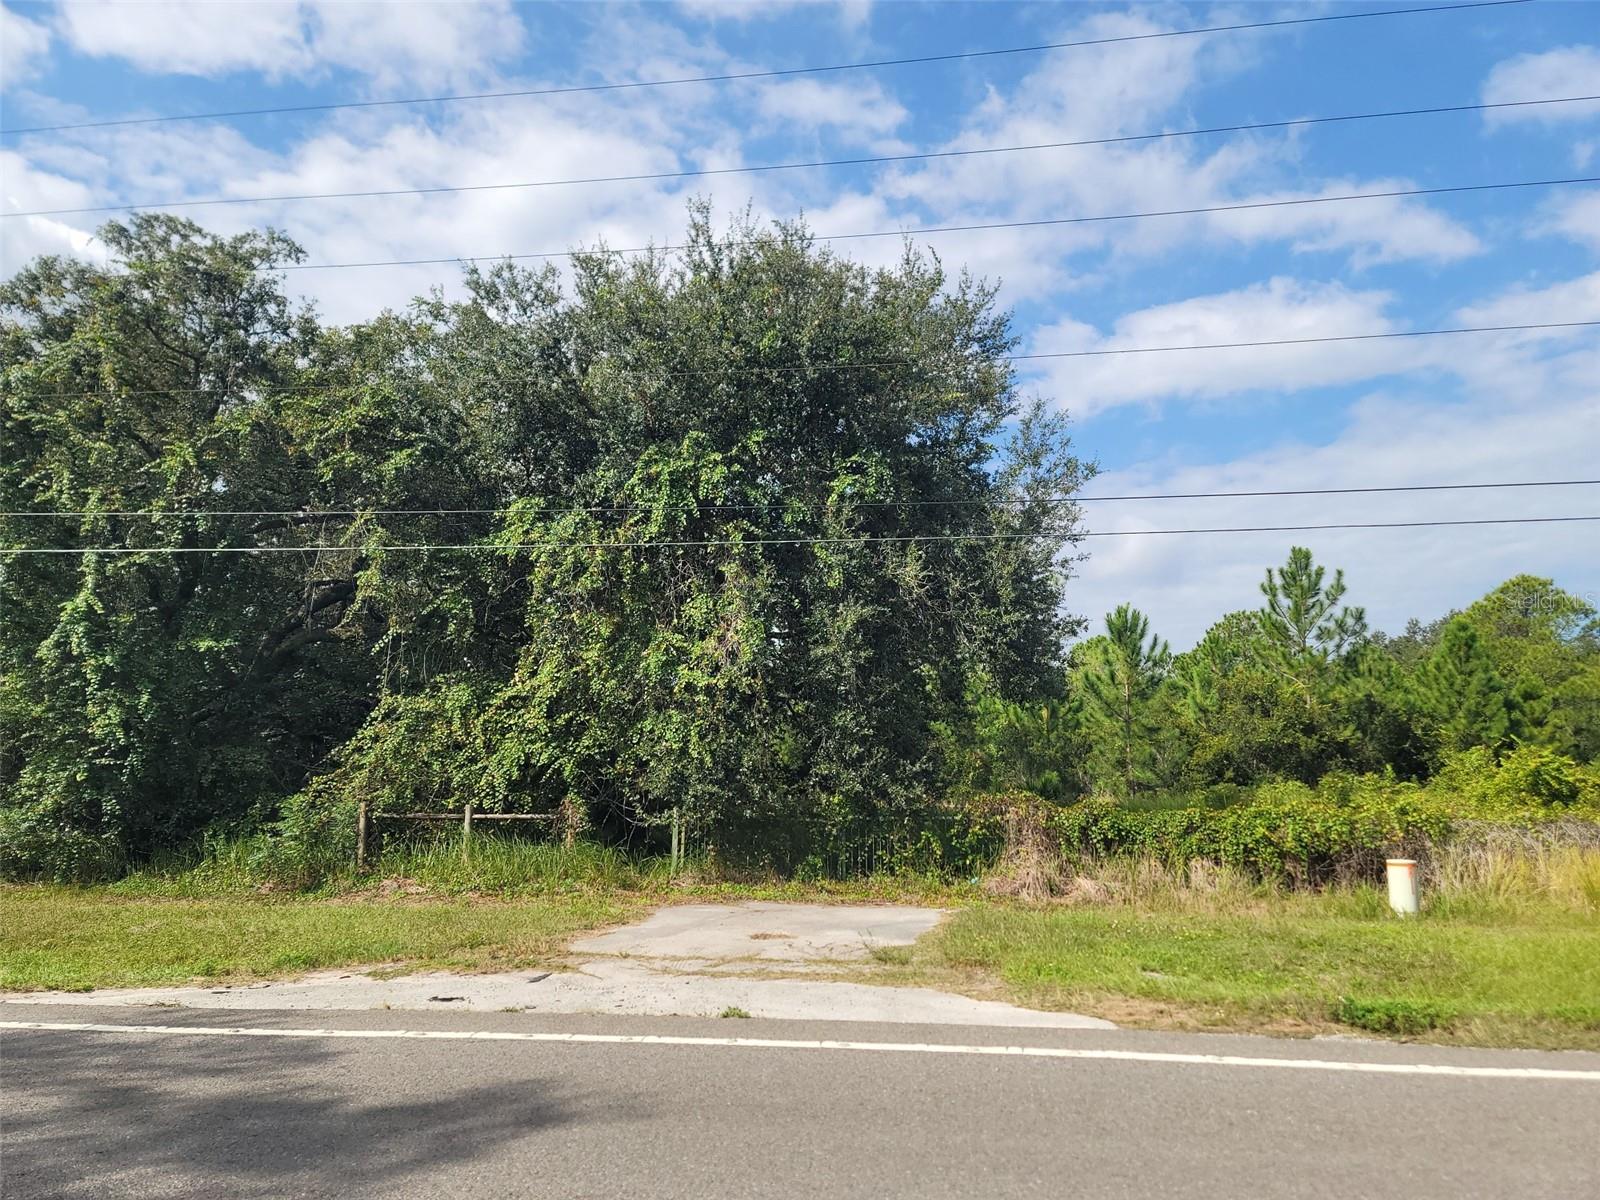 Photo of STATE ROAD 33, CLERMONT, FL 34711